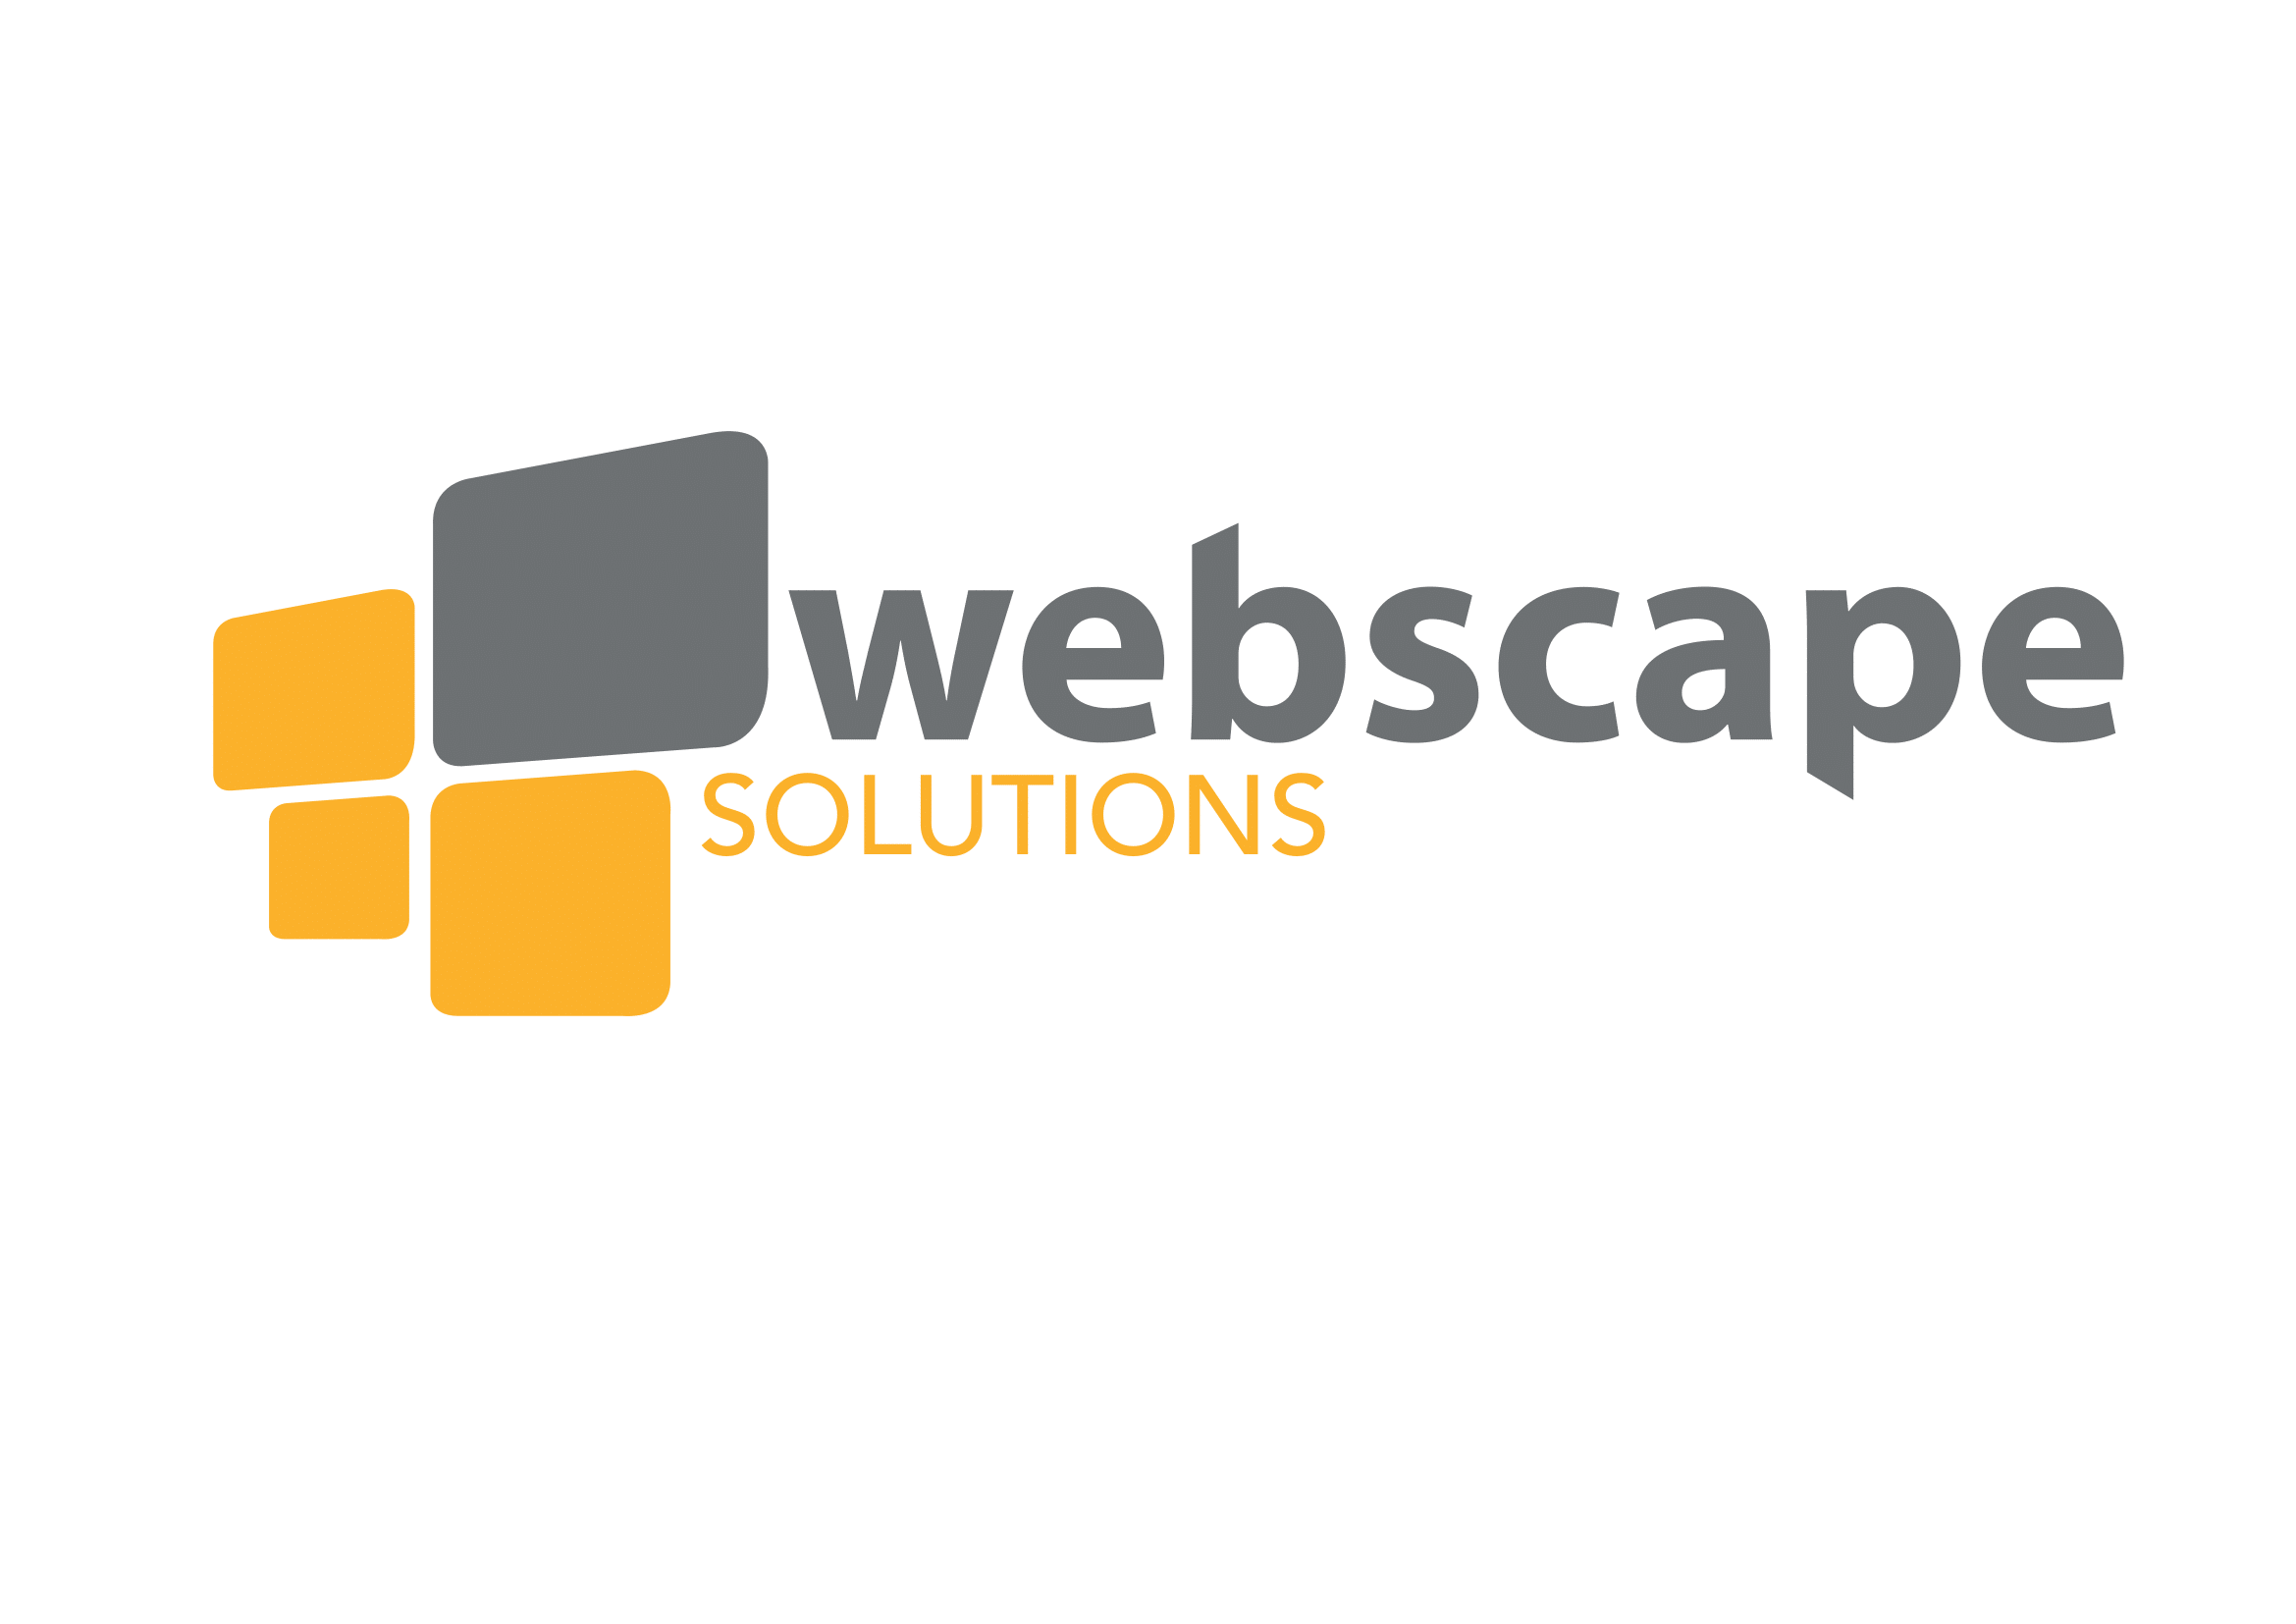 Webscape Solutions